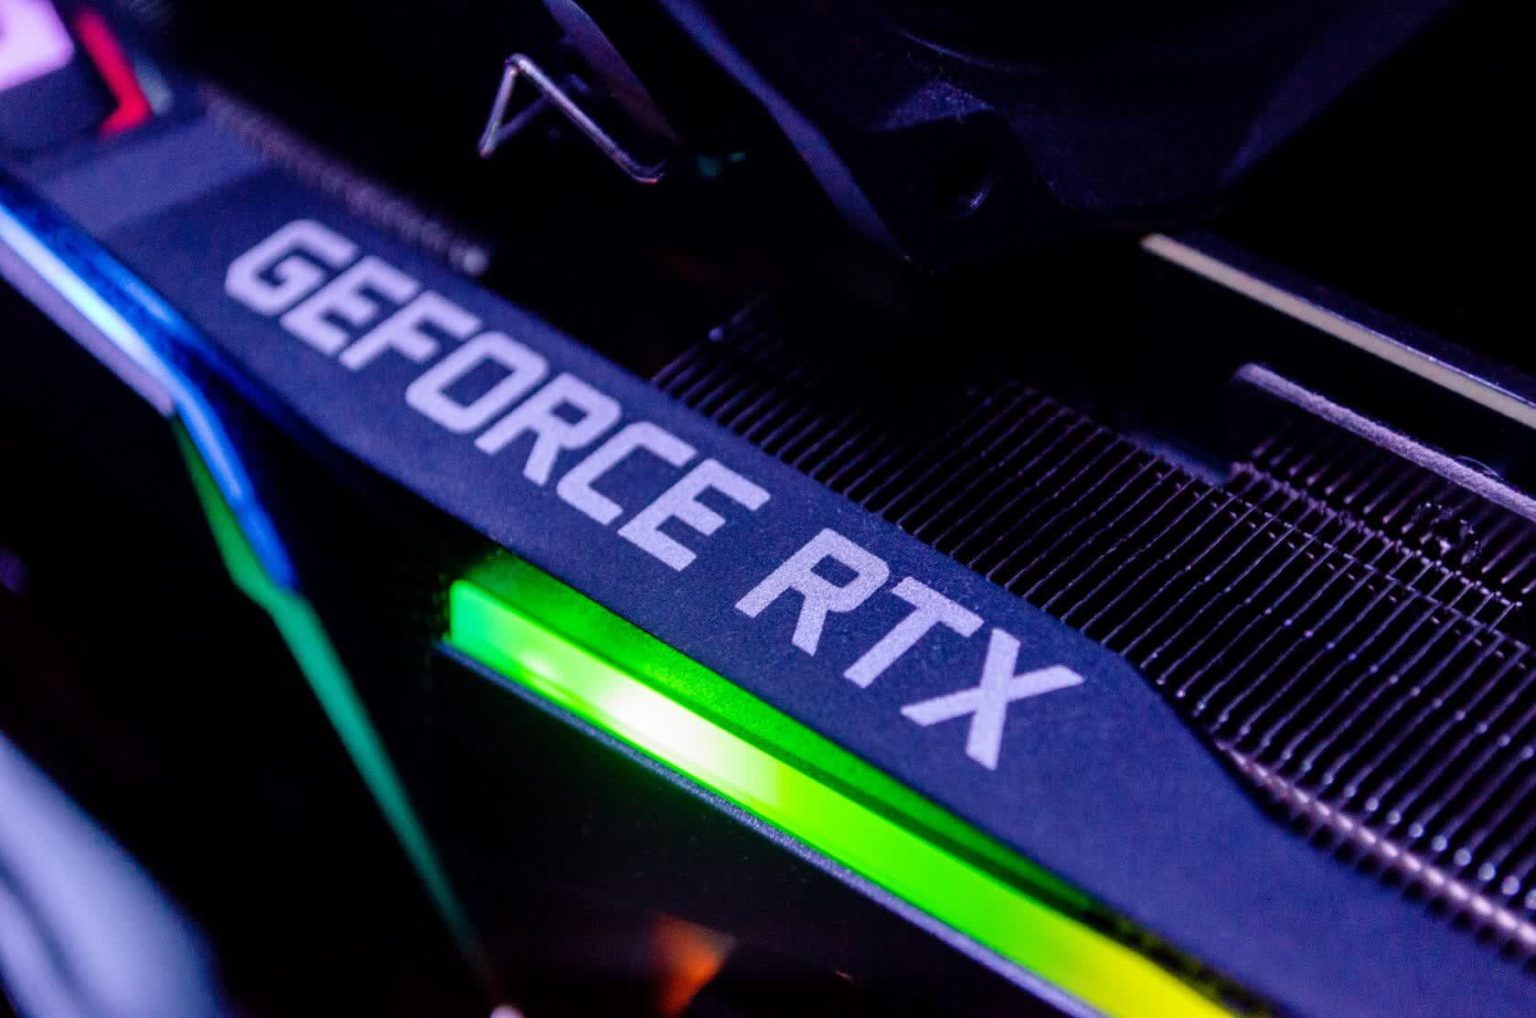 Nvidia will fully transition to open-source GPU kernel modules with R560 drivers